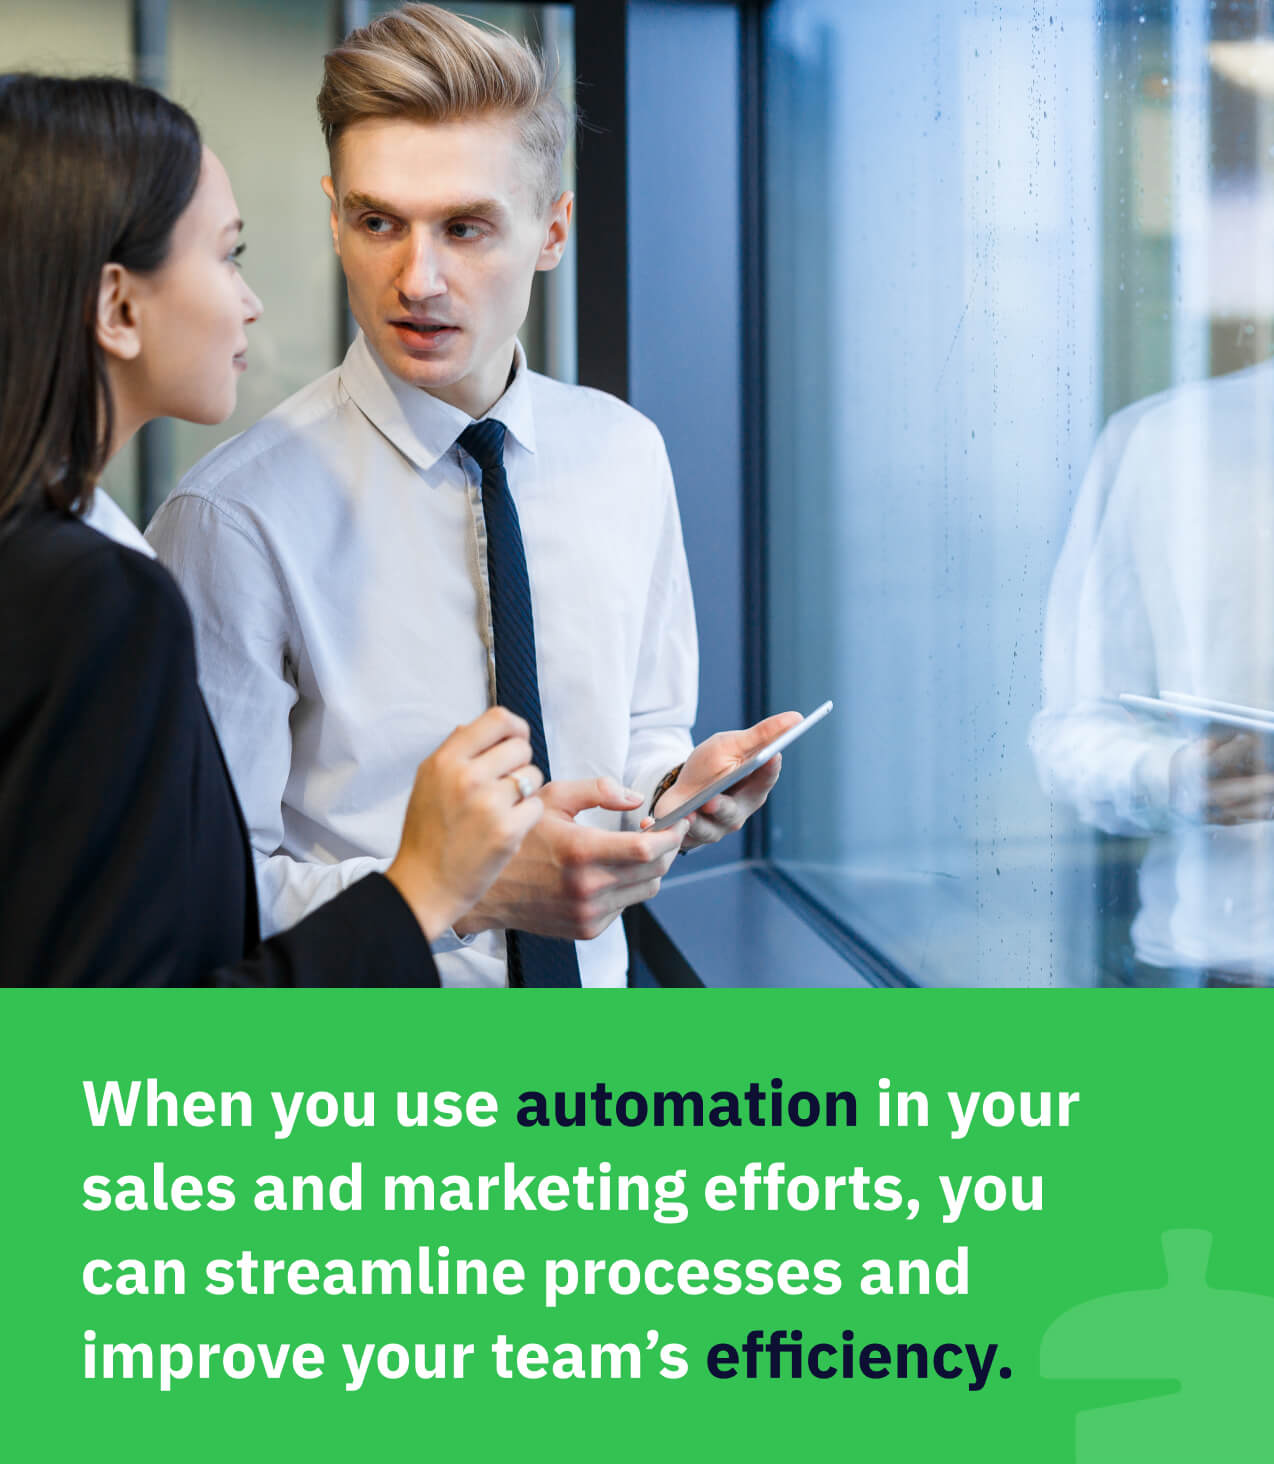 Using automation to improve efficiency